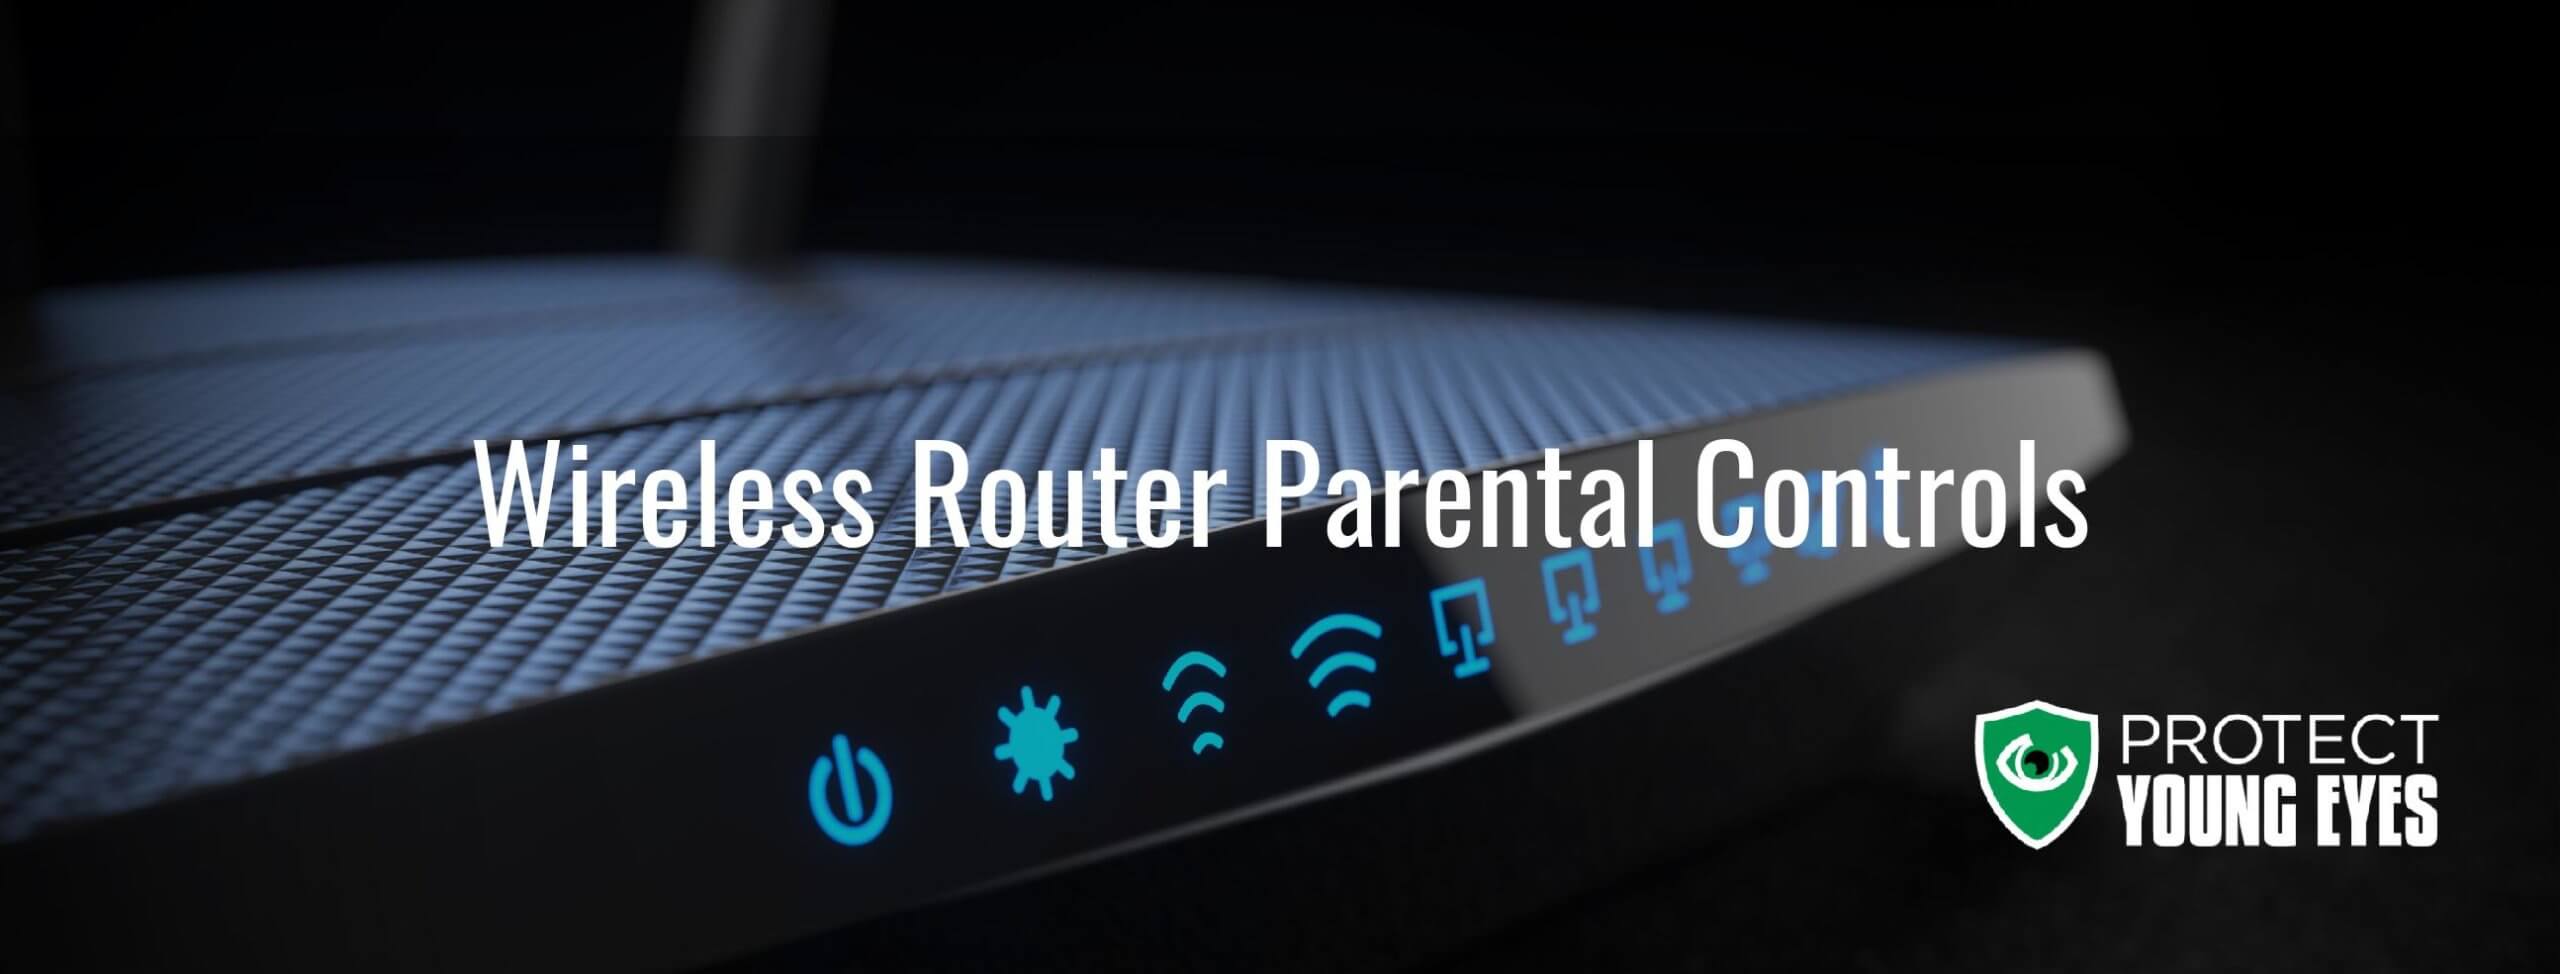 Wireless Router Parental Controls from Protect Young Eyes